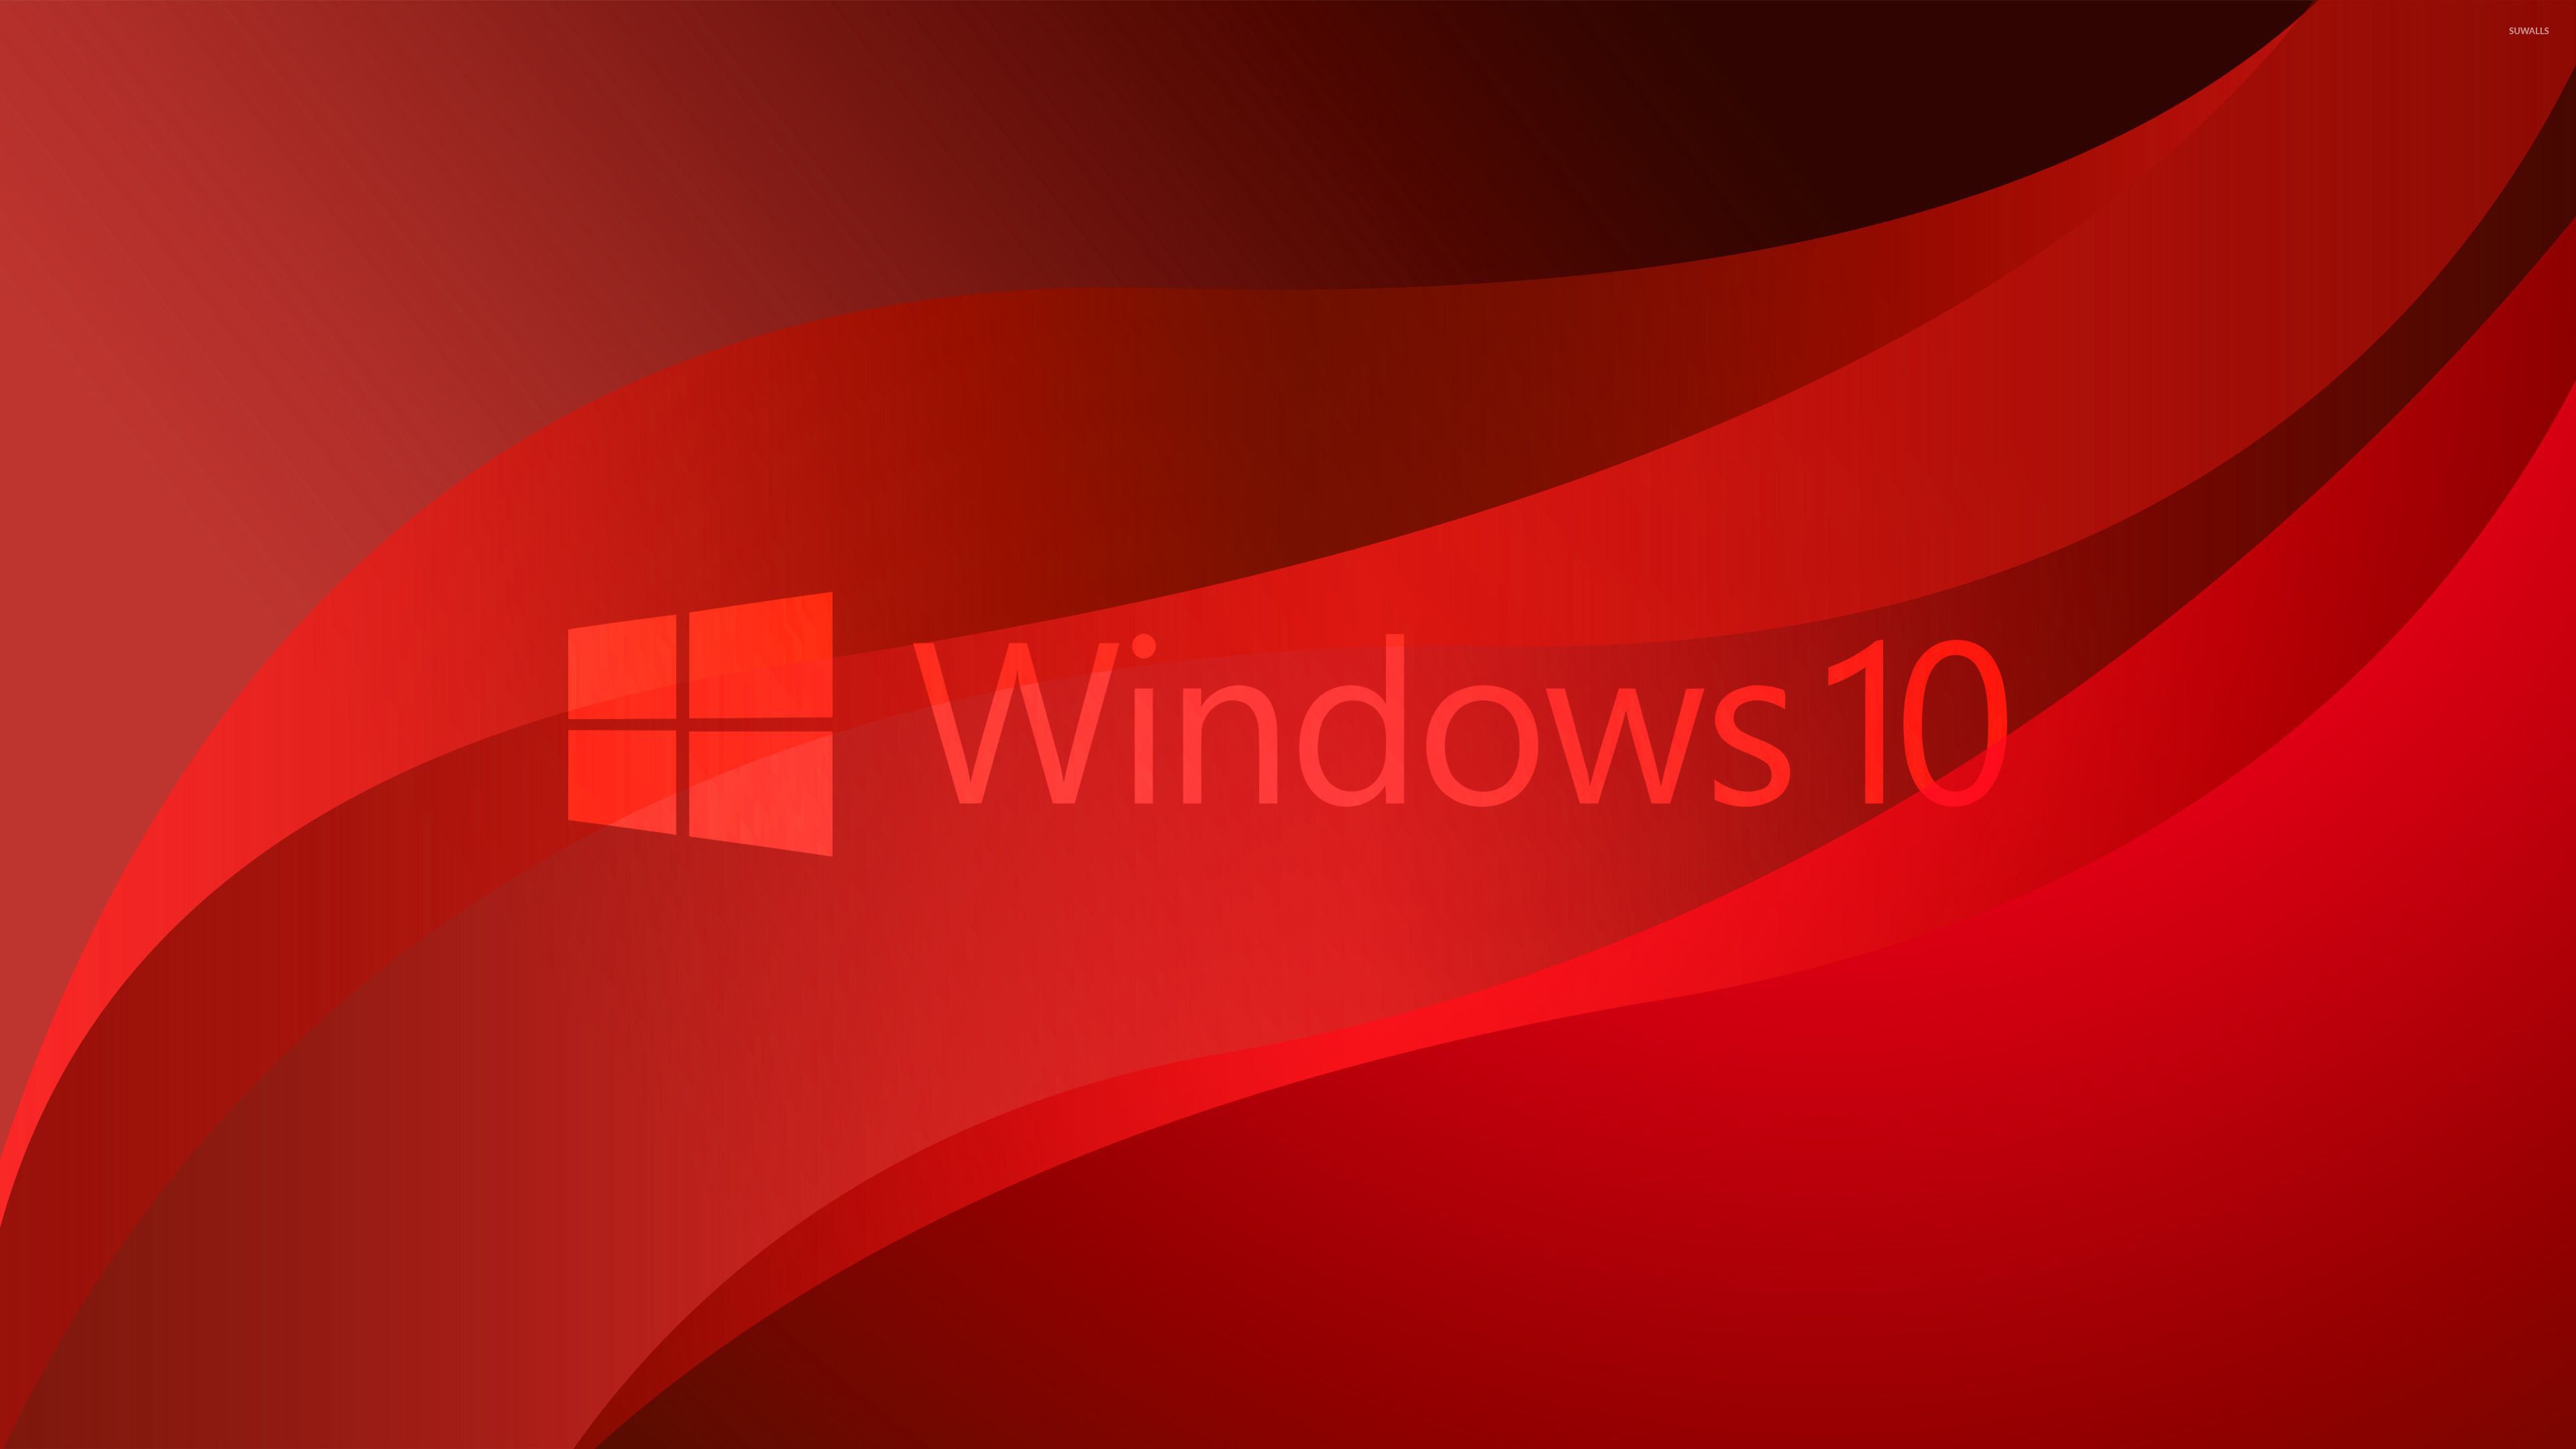 Red Windows 10 4K HD Red Aesthetic Wallpaper